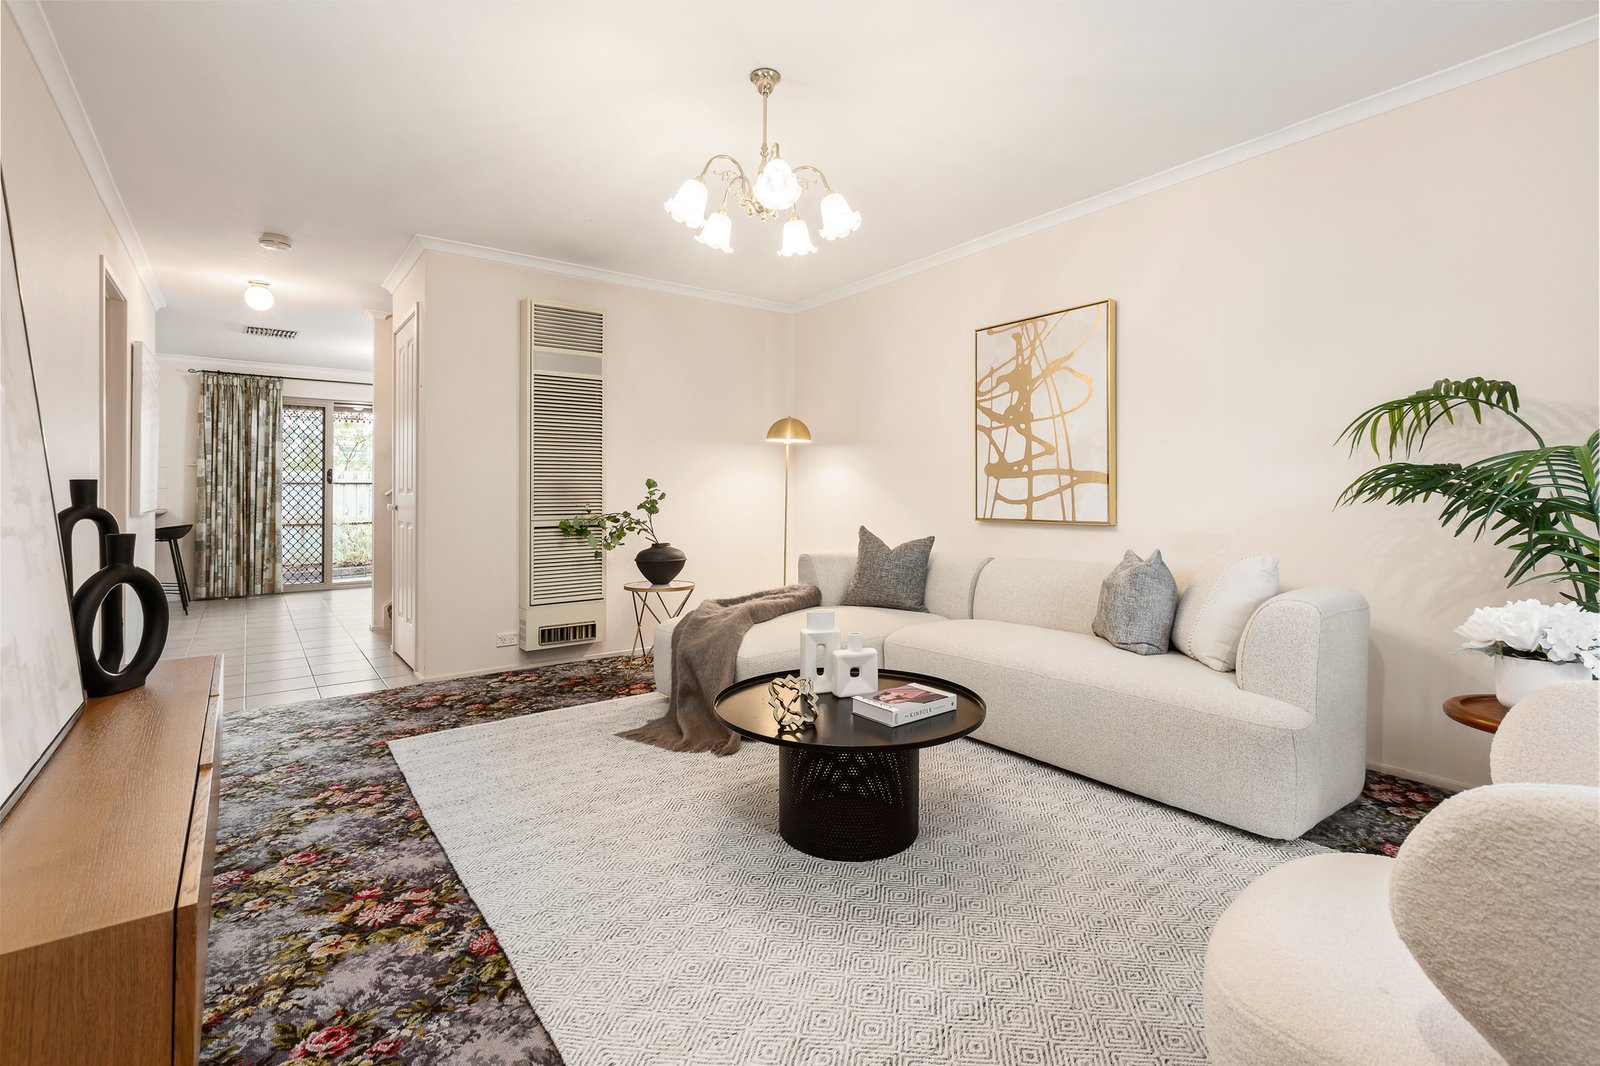 20 Marong Terrace, Forest Hill, 3131